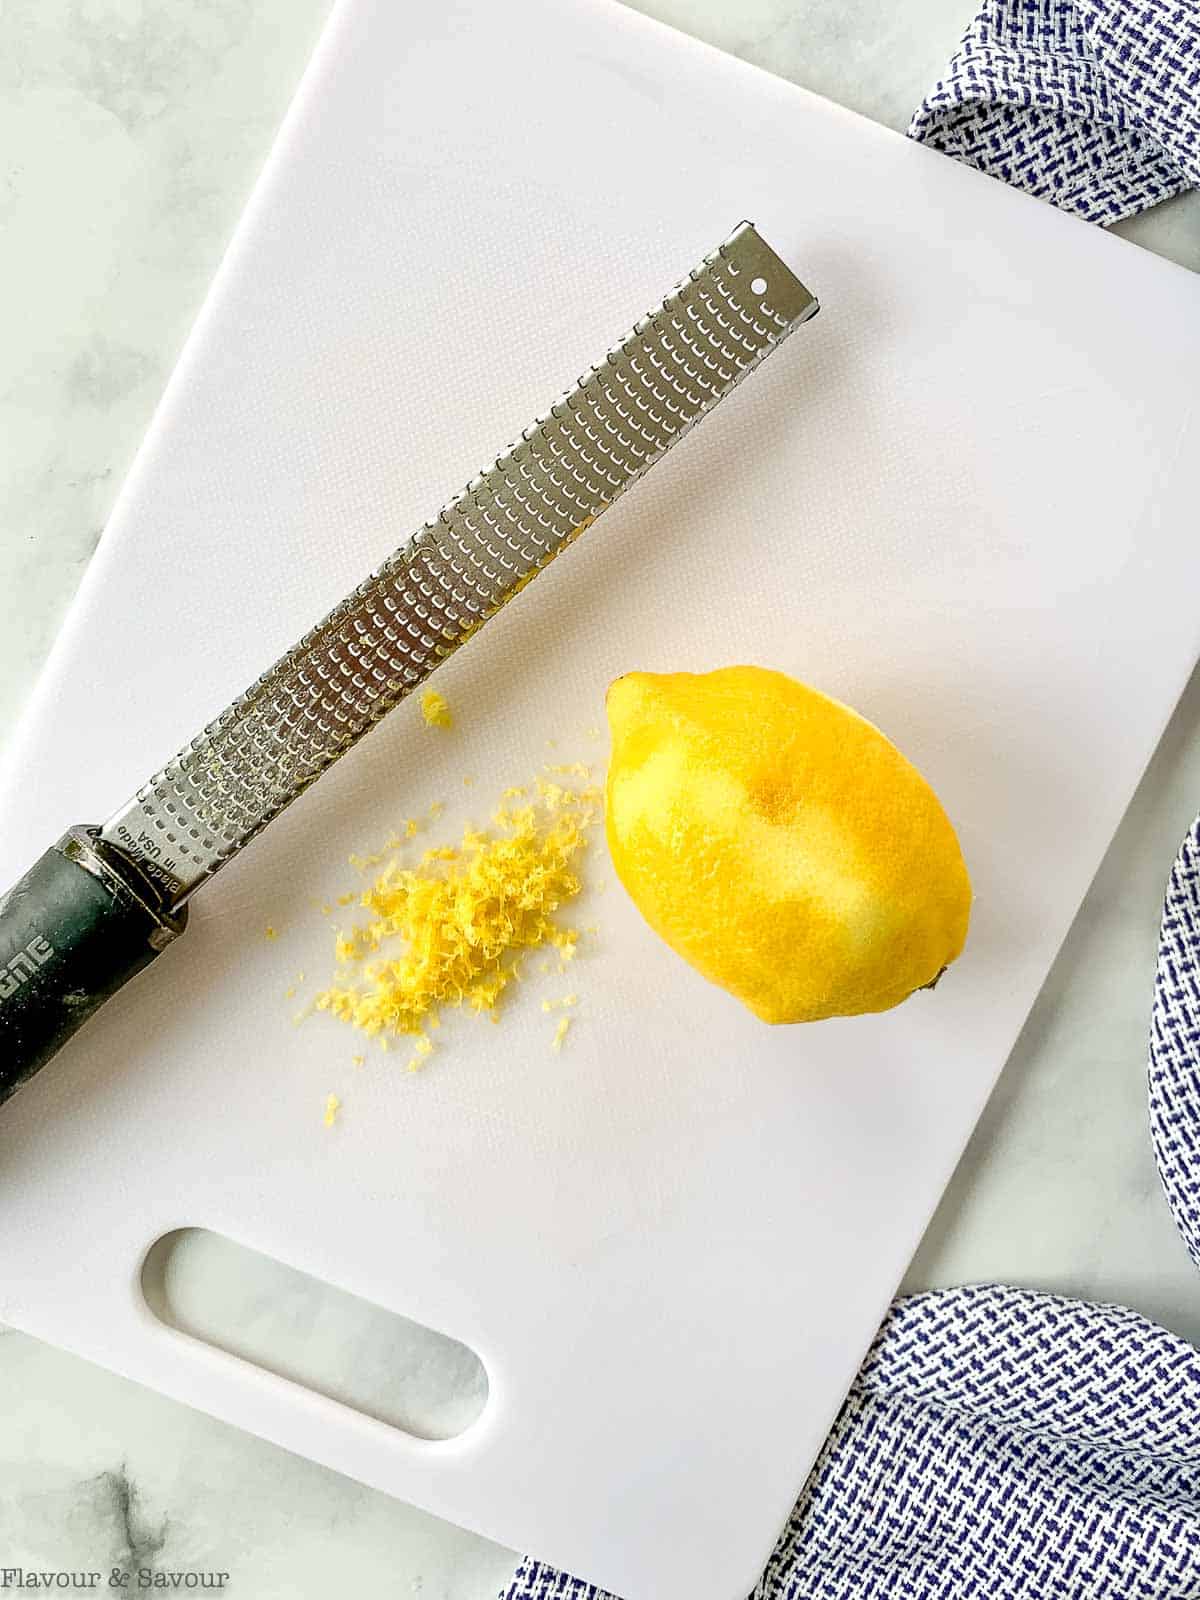 A microplane and lemon zest.